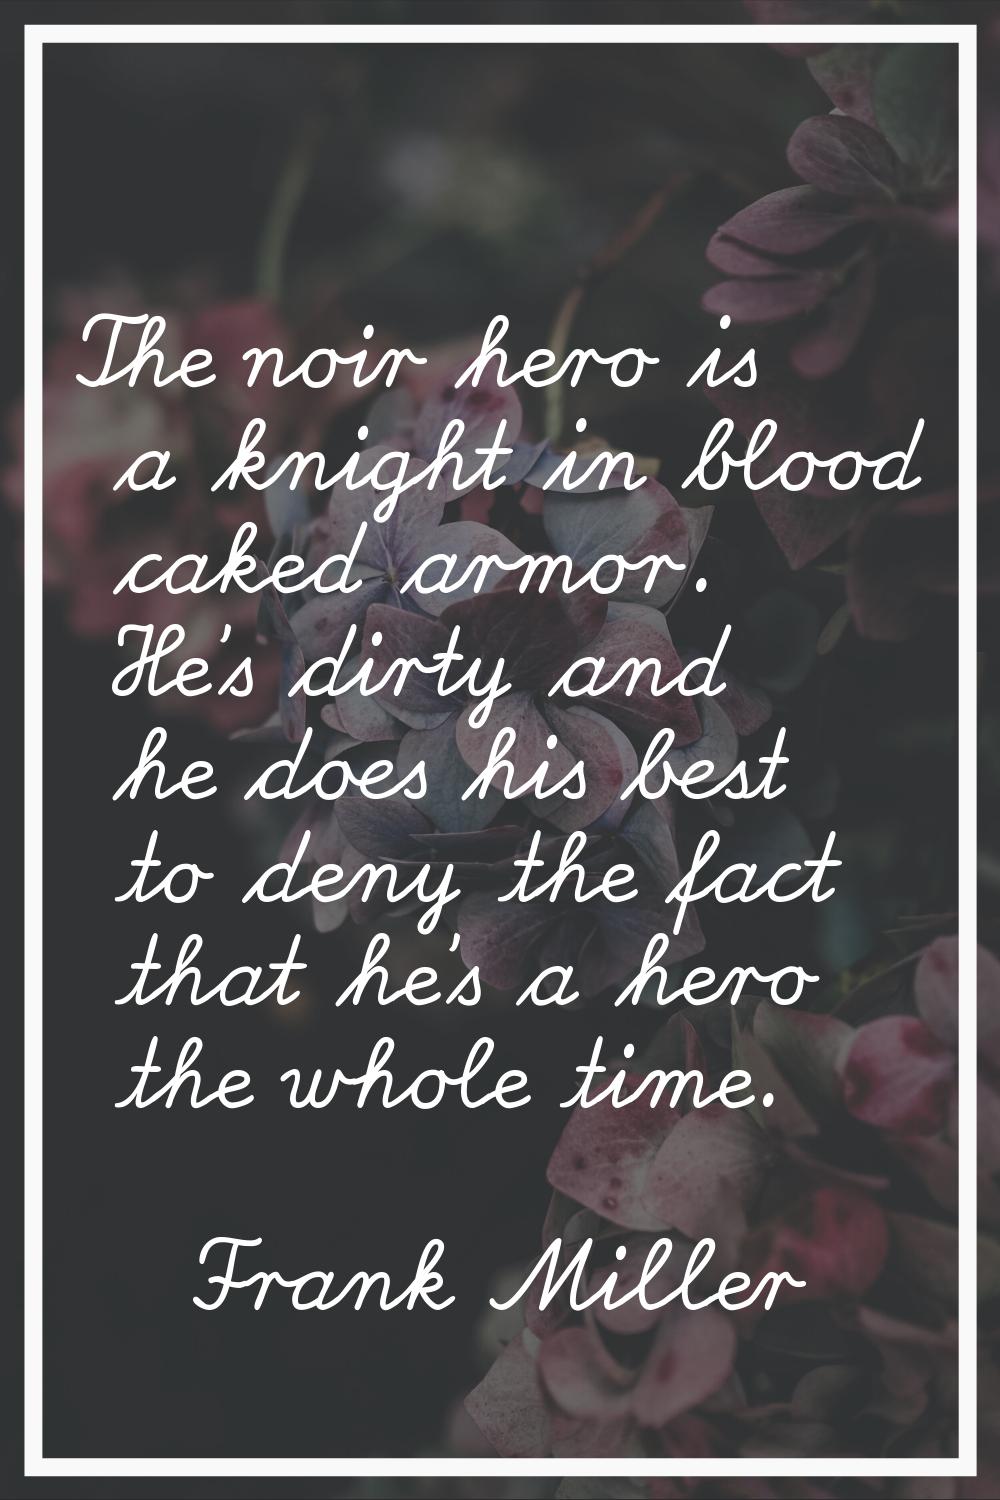 The noir hero is a knight in blood caked armor. He's dirty and he does his best to deny the fact th